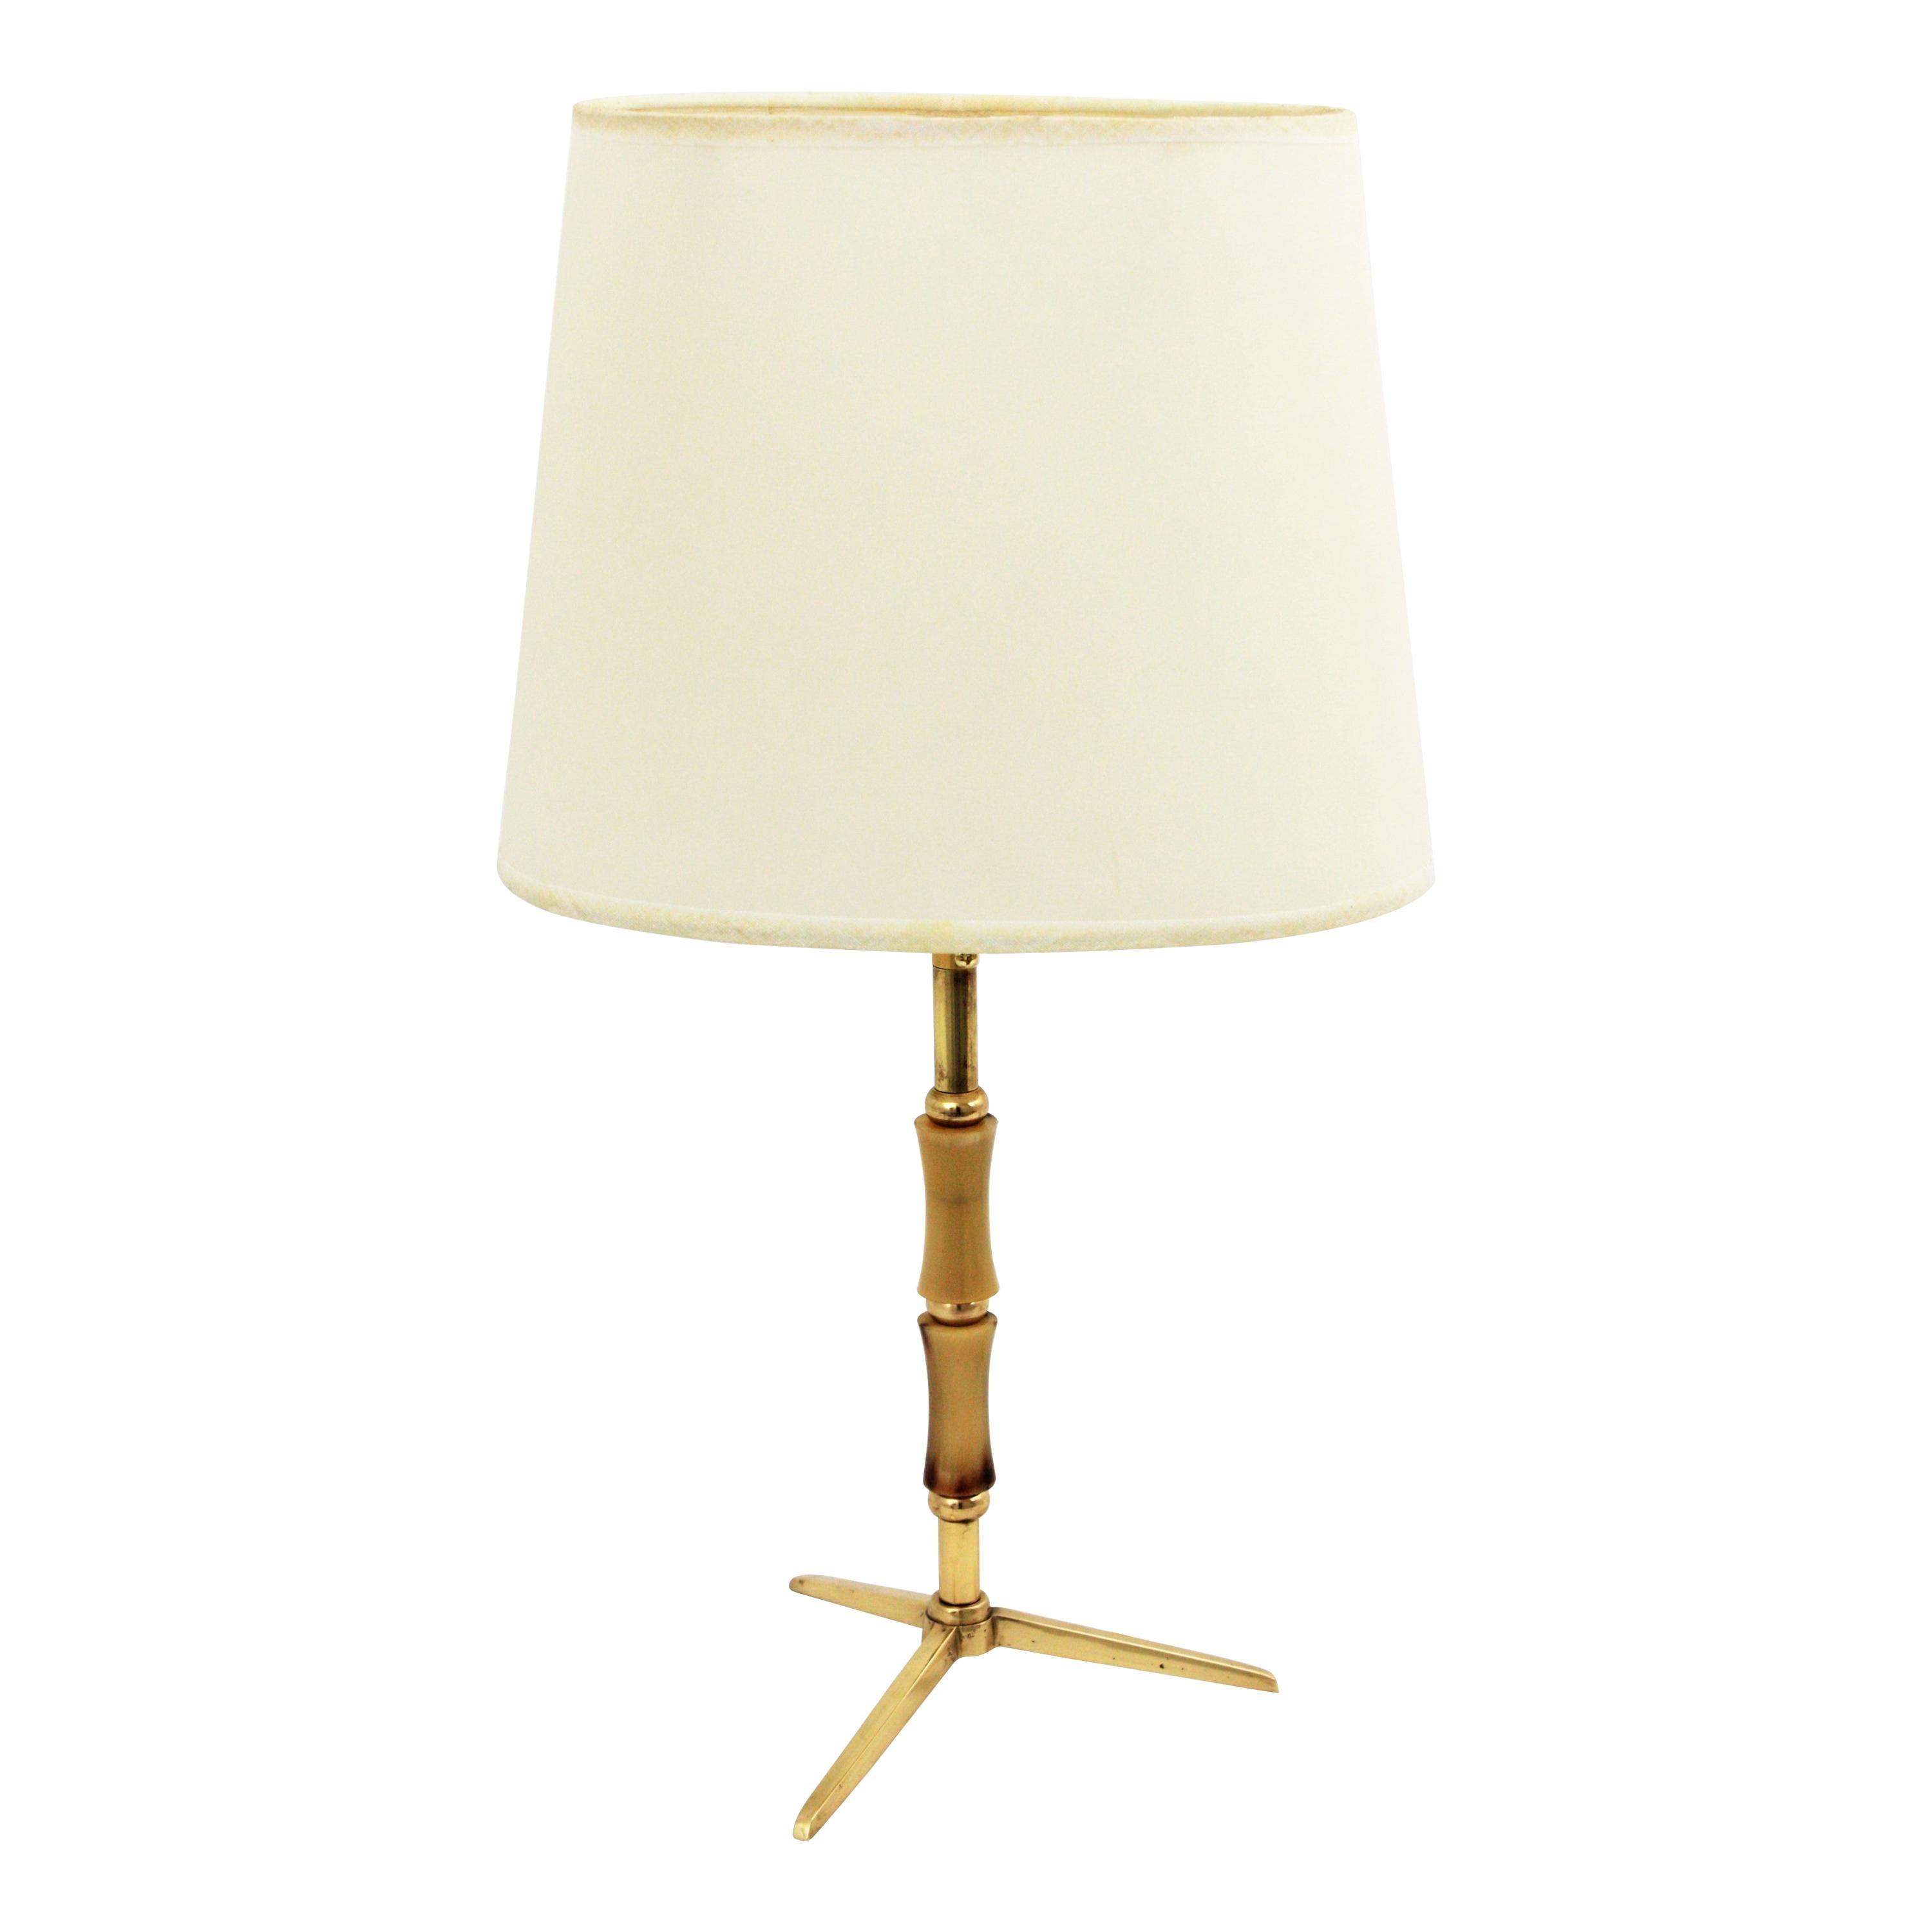 Jacques Adnet Faux Bamboo Brass Tripod Table Lamp, 1950s